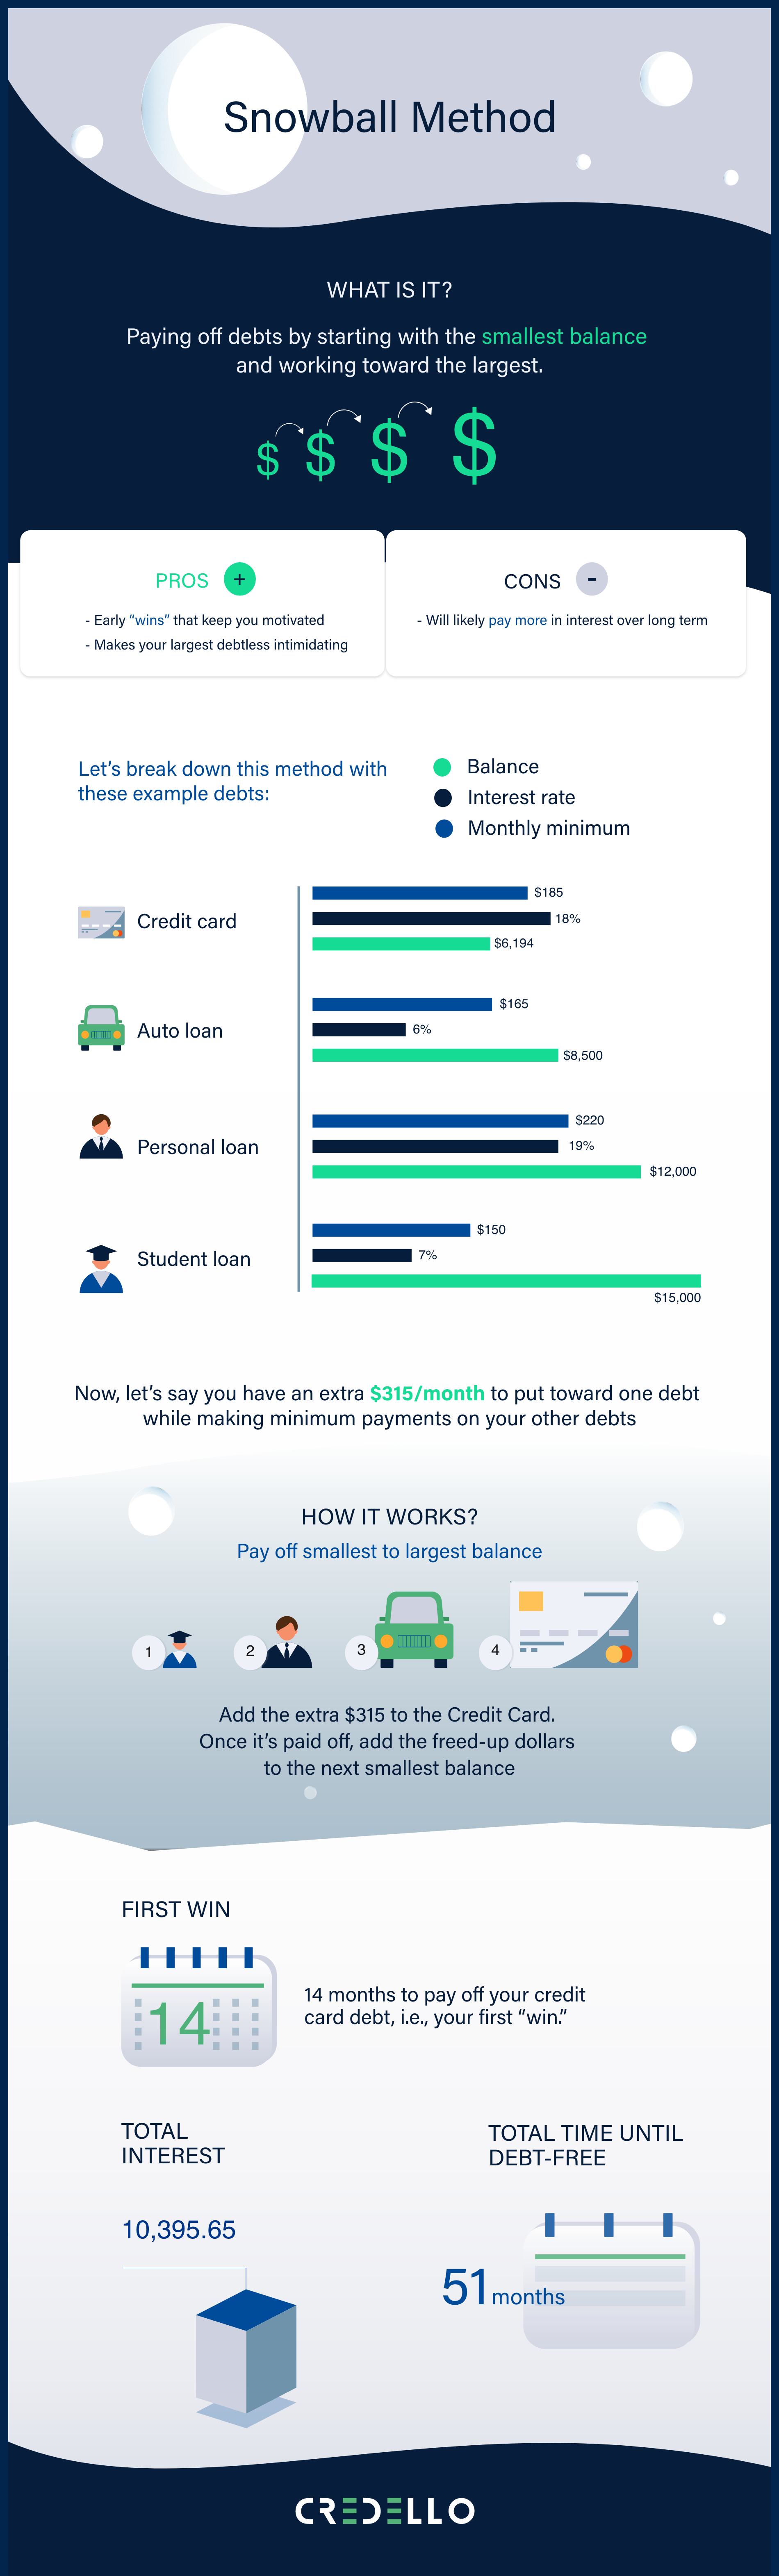 What is the debt snowball method and how does it work?